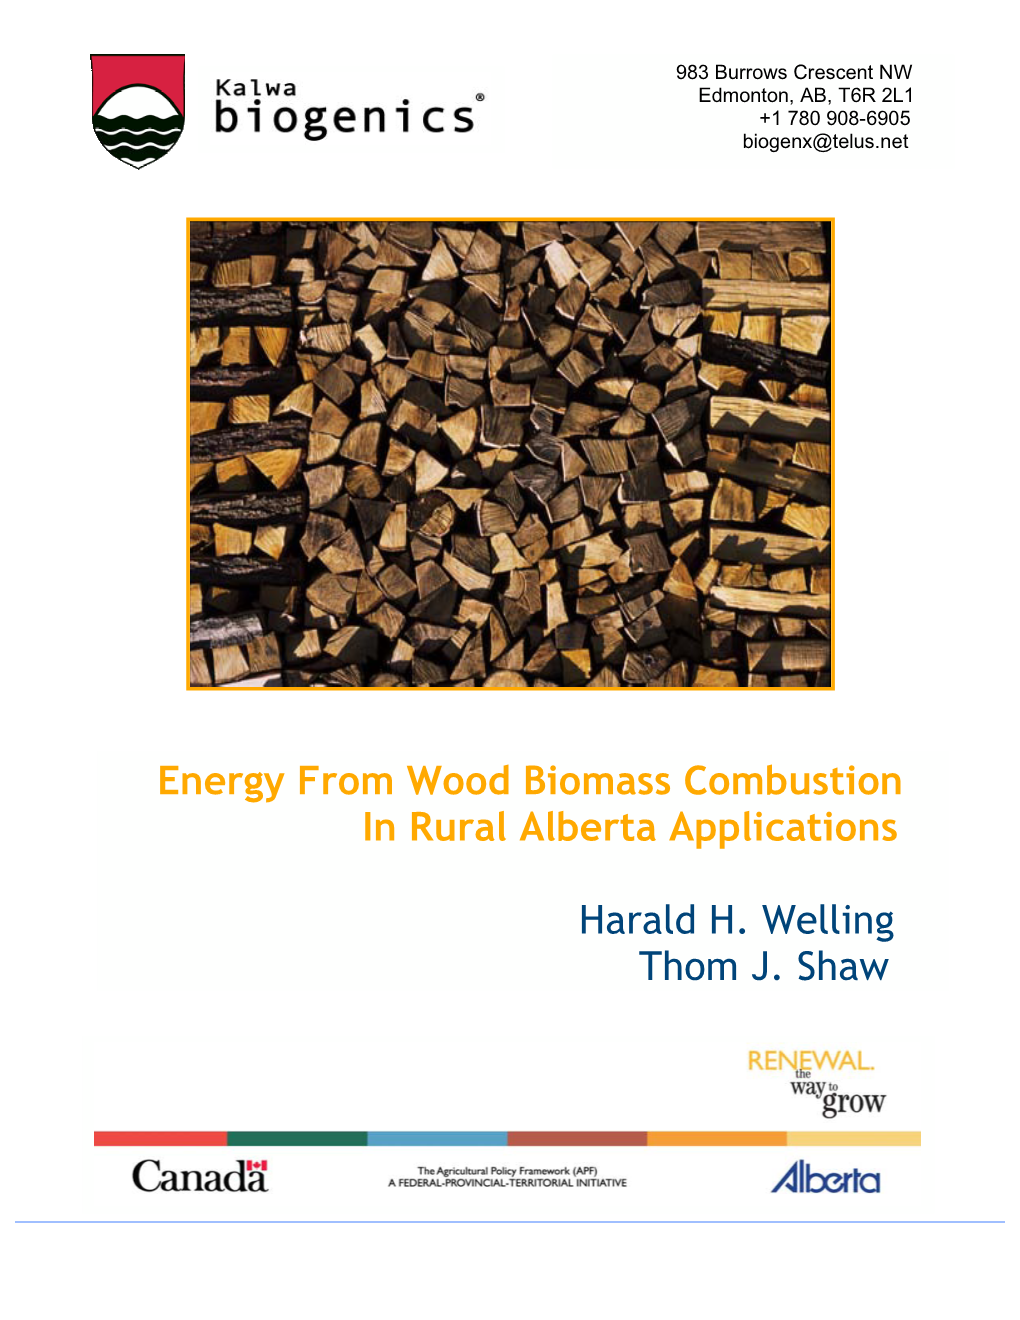 Energy from Wood Biomass Combustion in Rural Alberta Applications